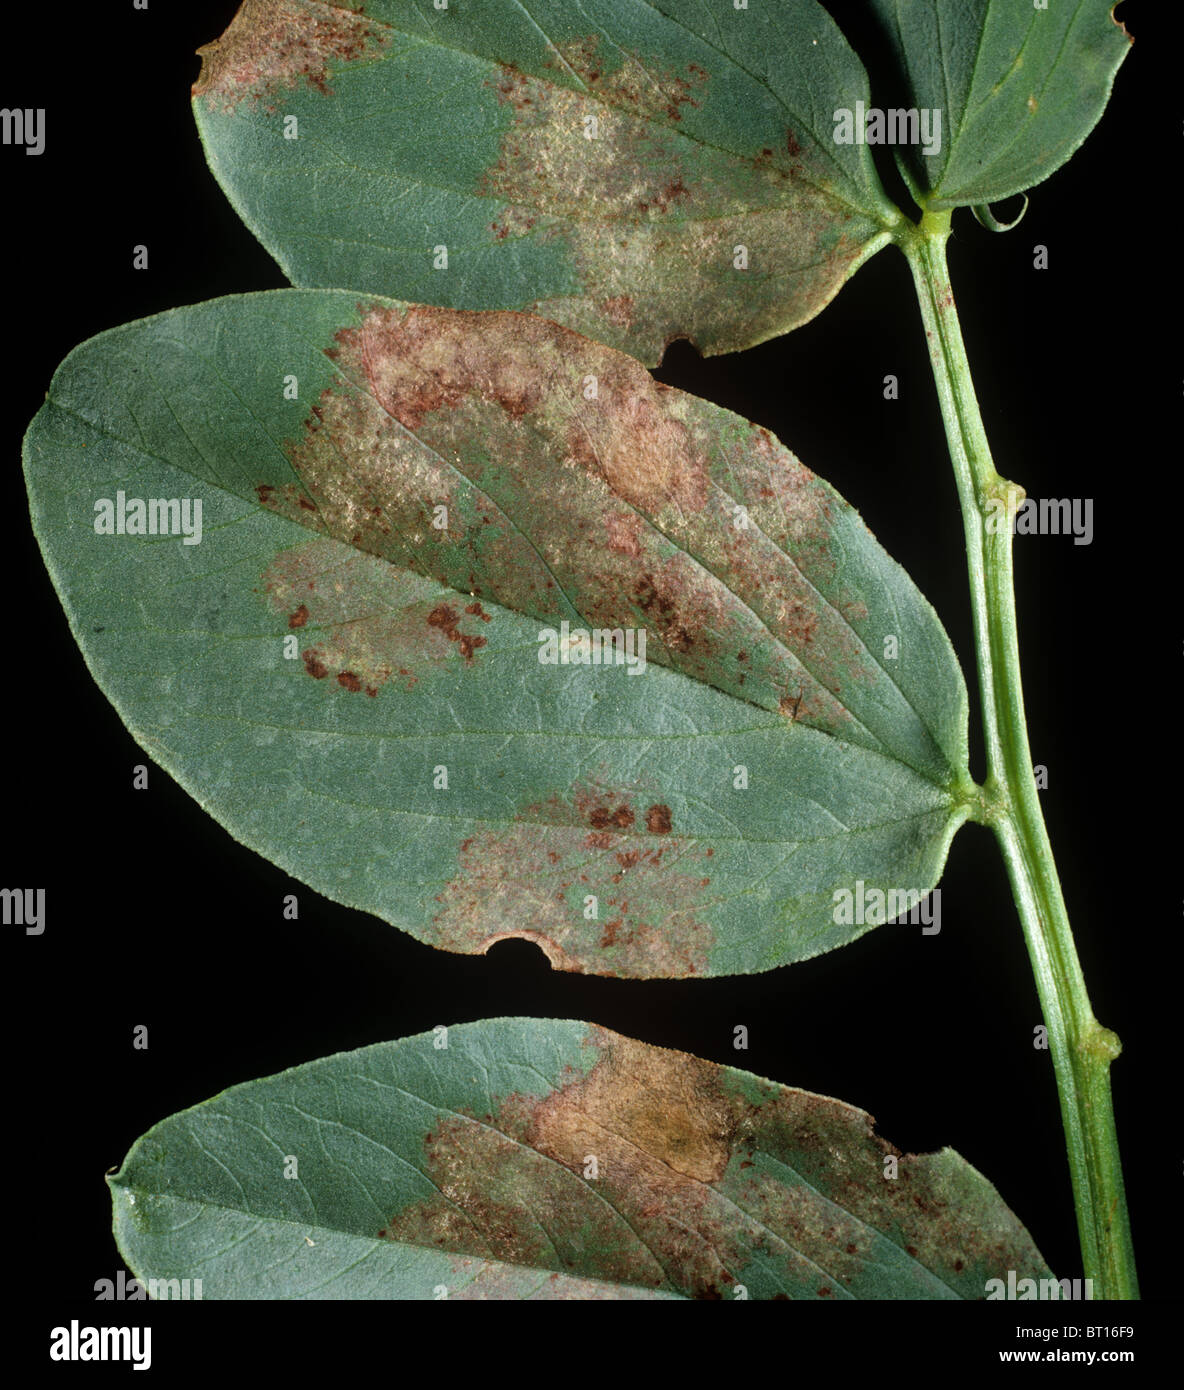 Downy mildew (Peronospora viciae) lesions on infected field bean leaf Stock Photo